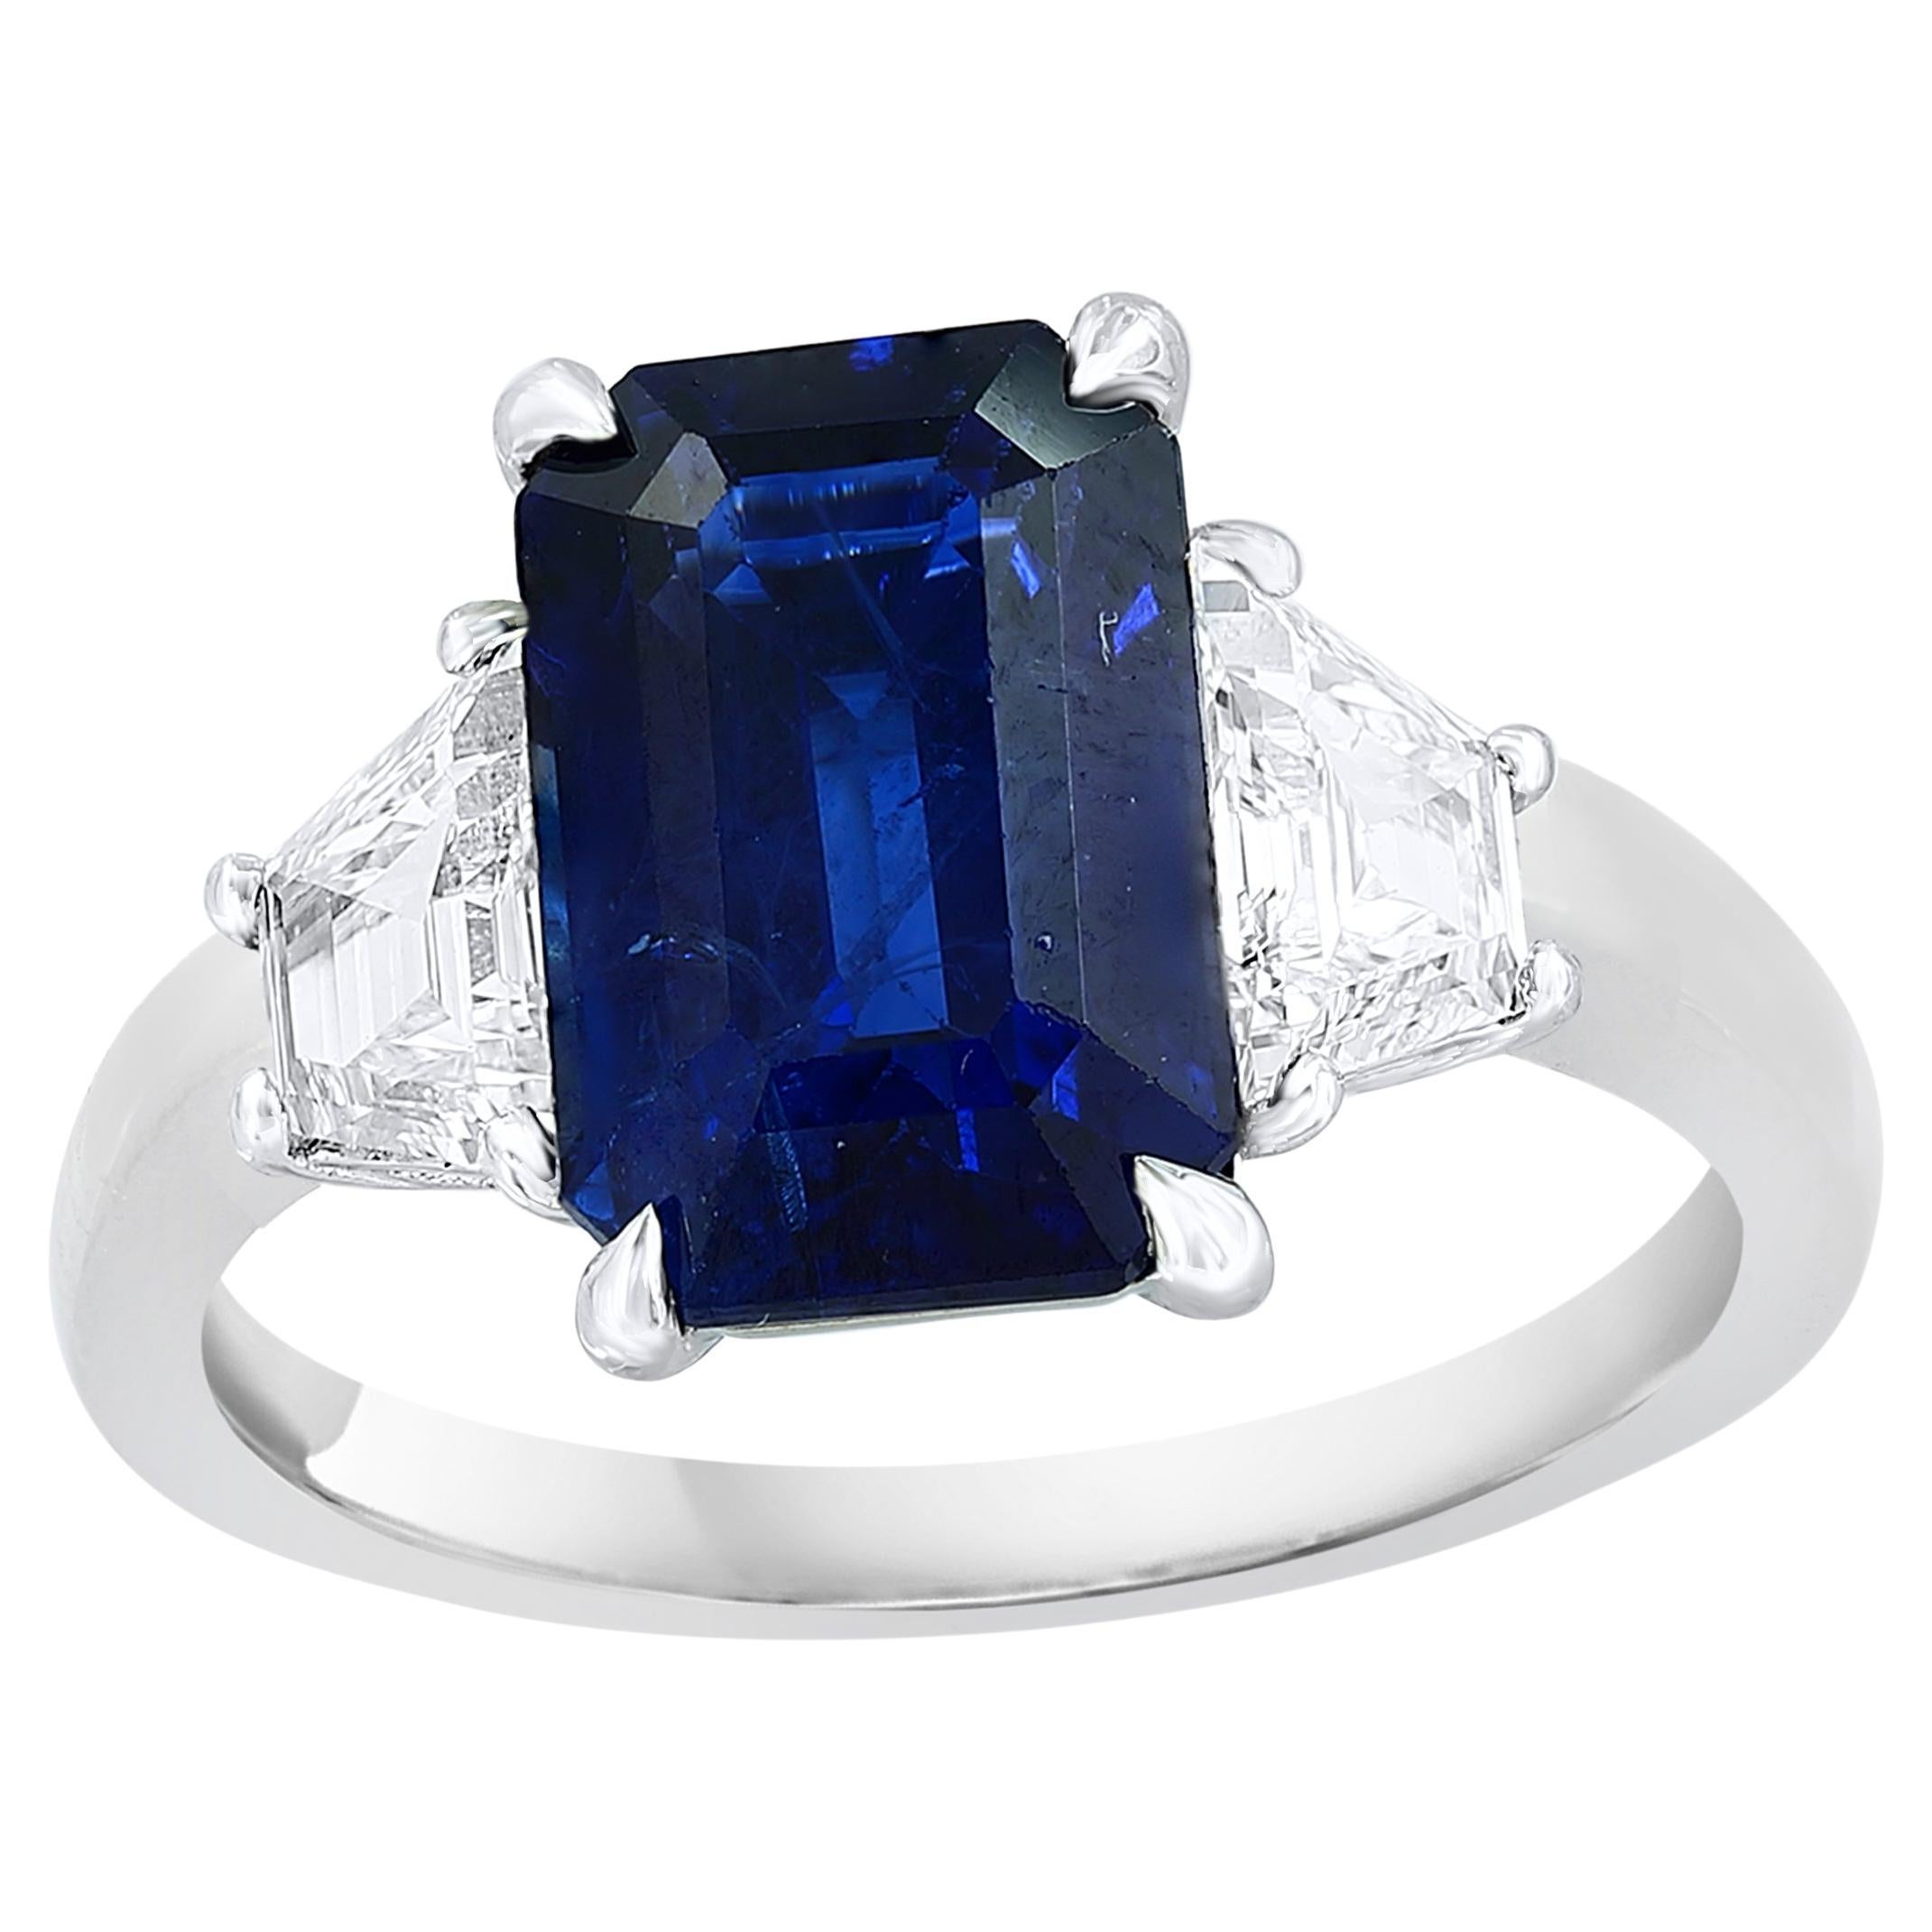 Certified 3.18 Carat Emerald Cut Sapphire & Diamond Engagement Ring in Platinum For Sale